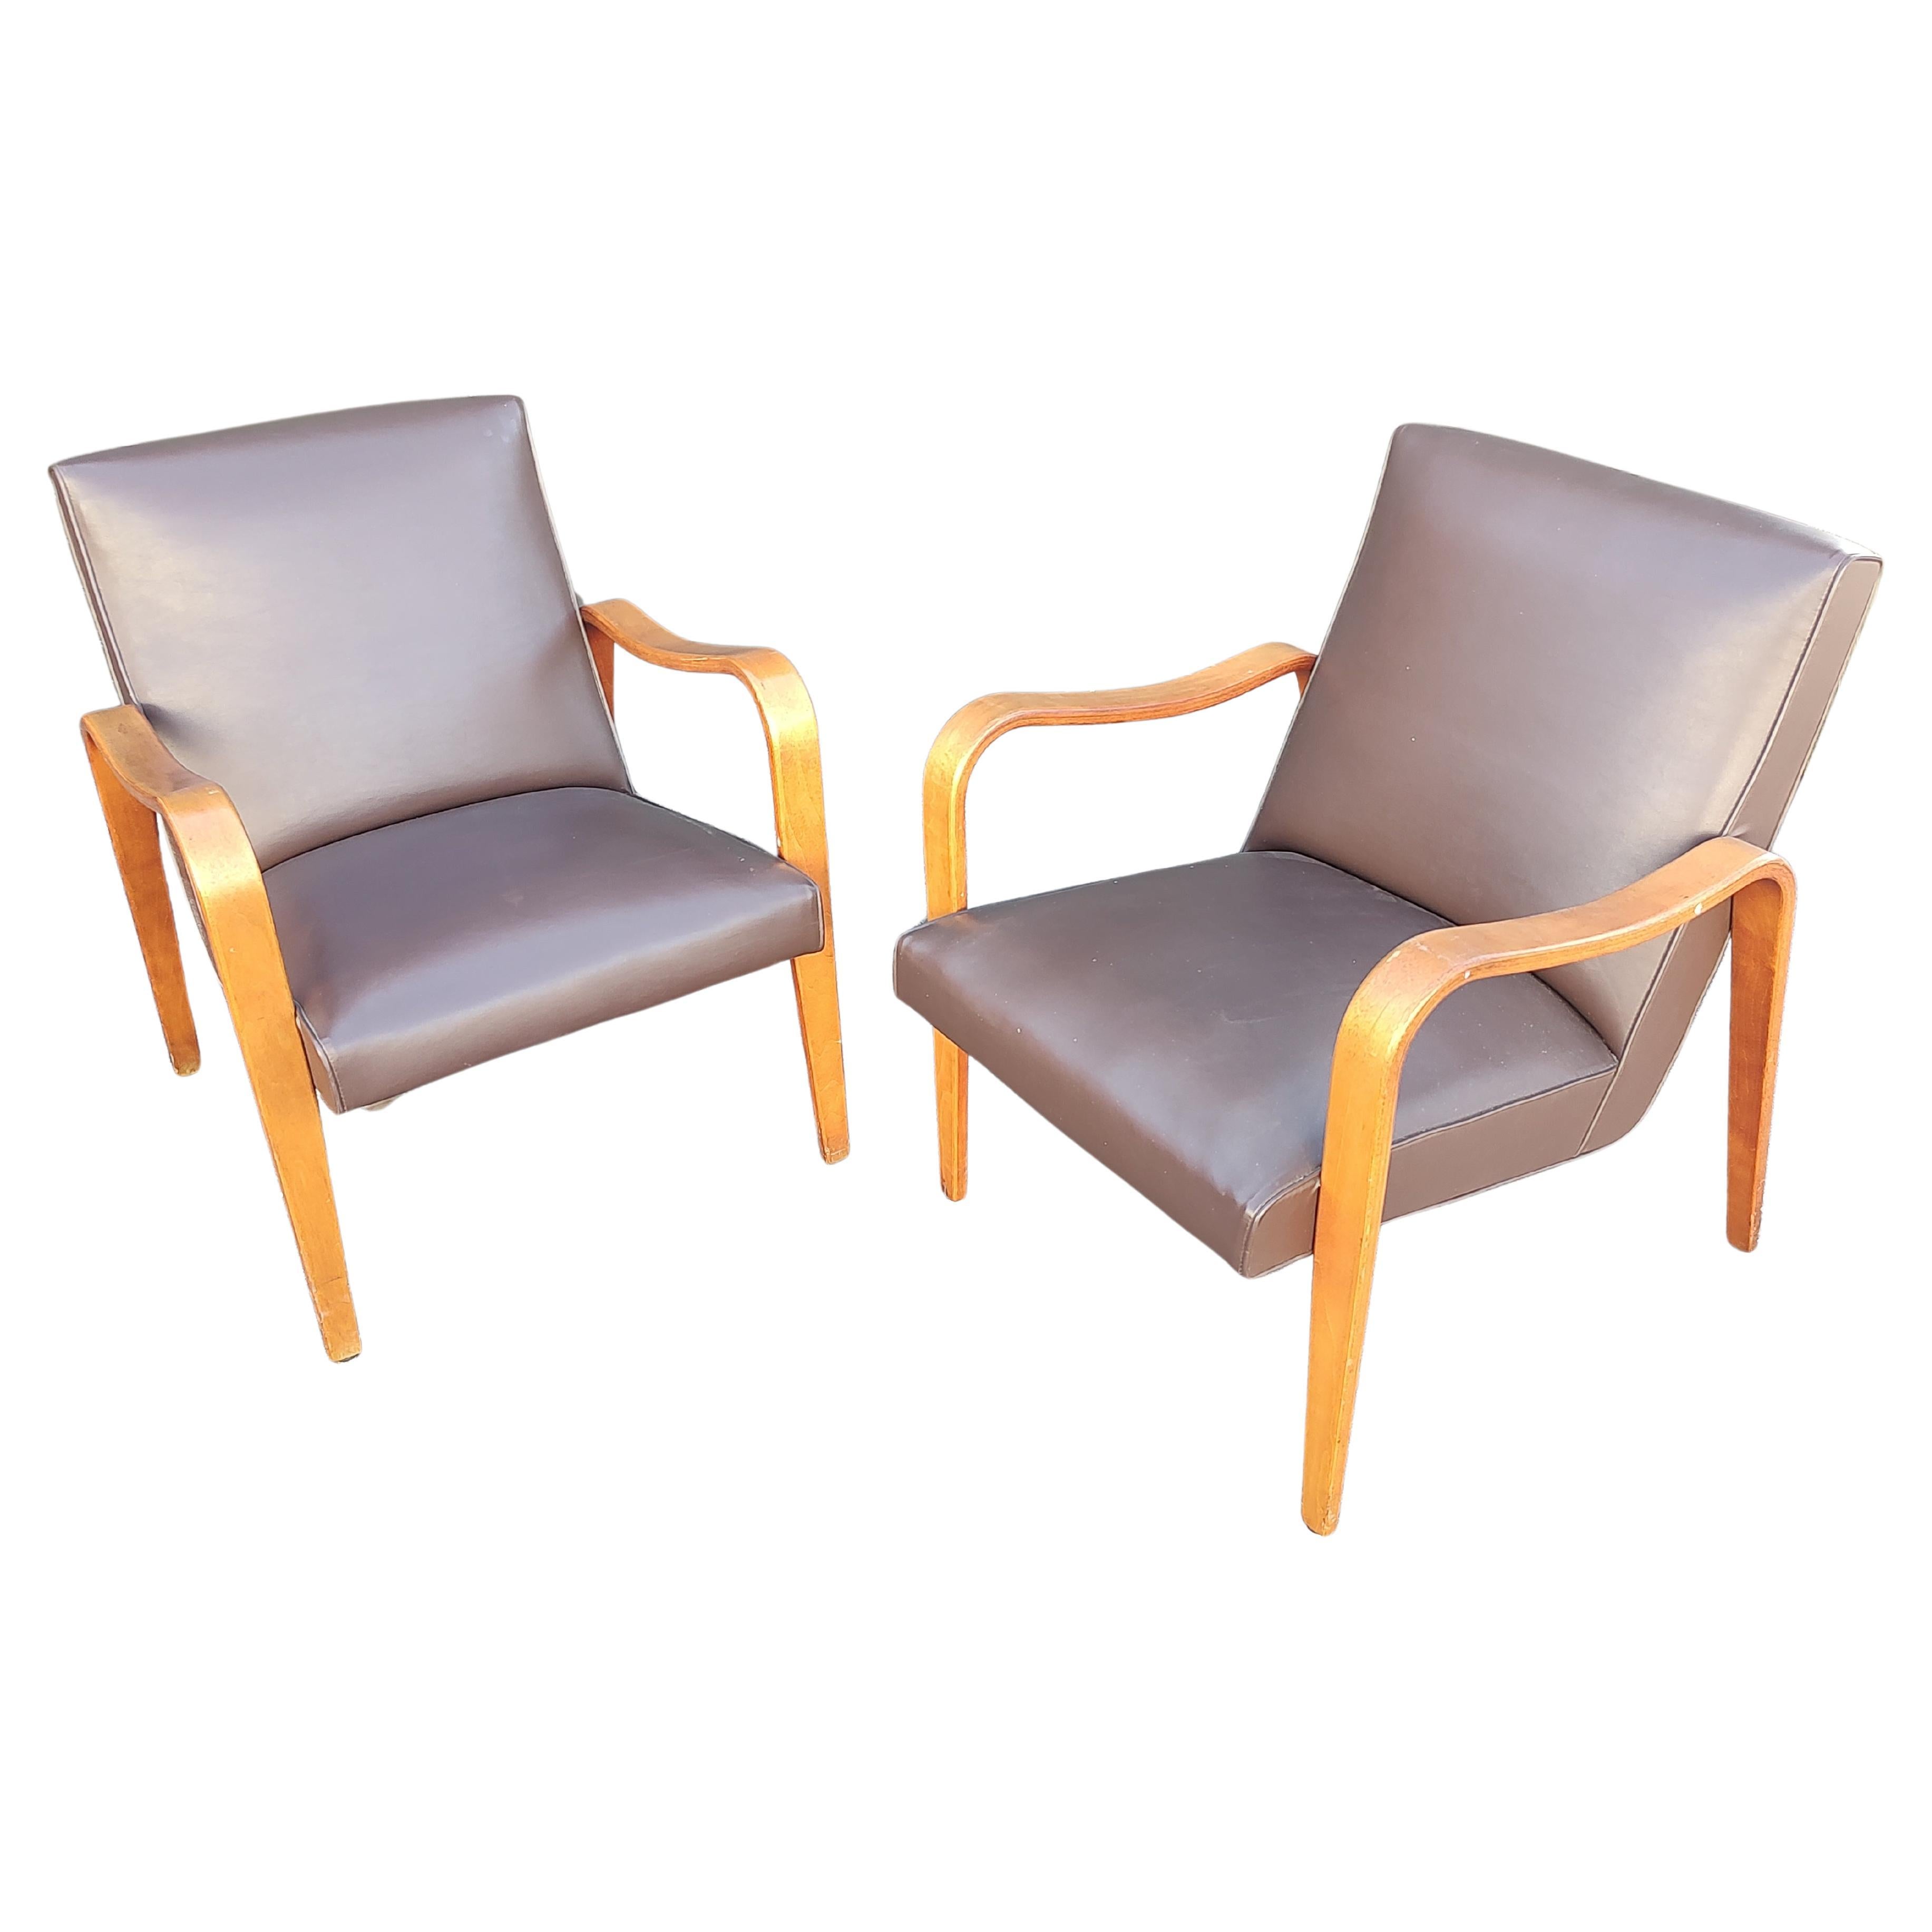 Mid Century Modern Sculptural Bent Arm Lounge Chairs in Birch by Thonet